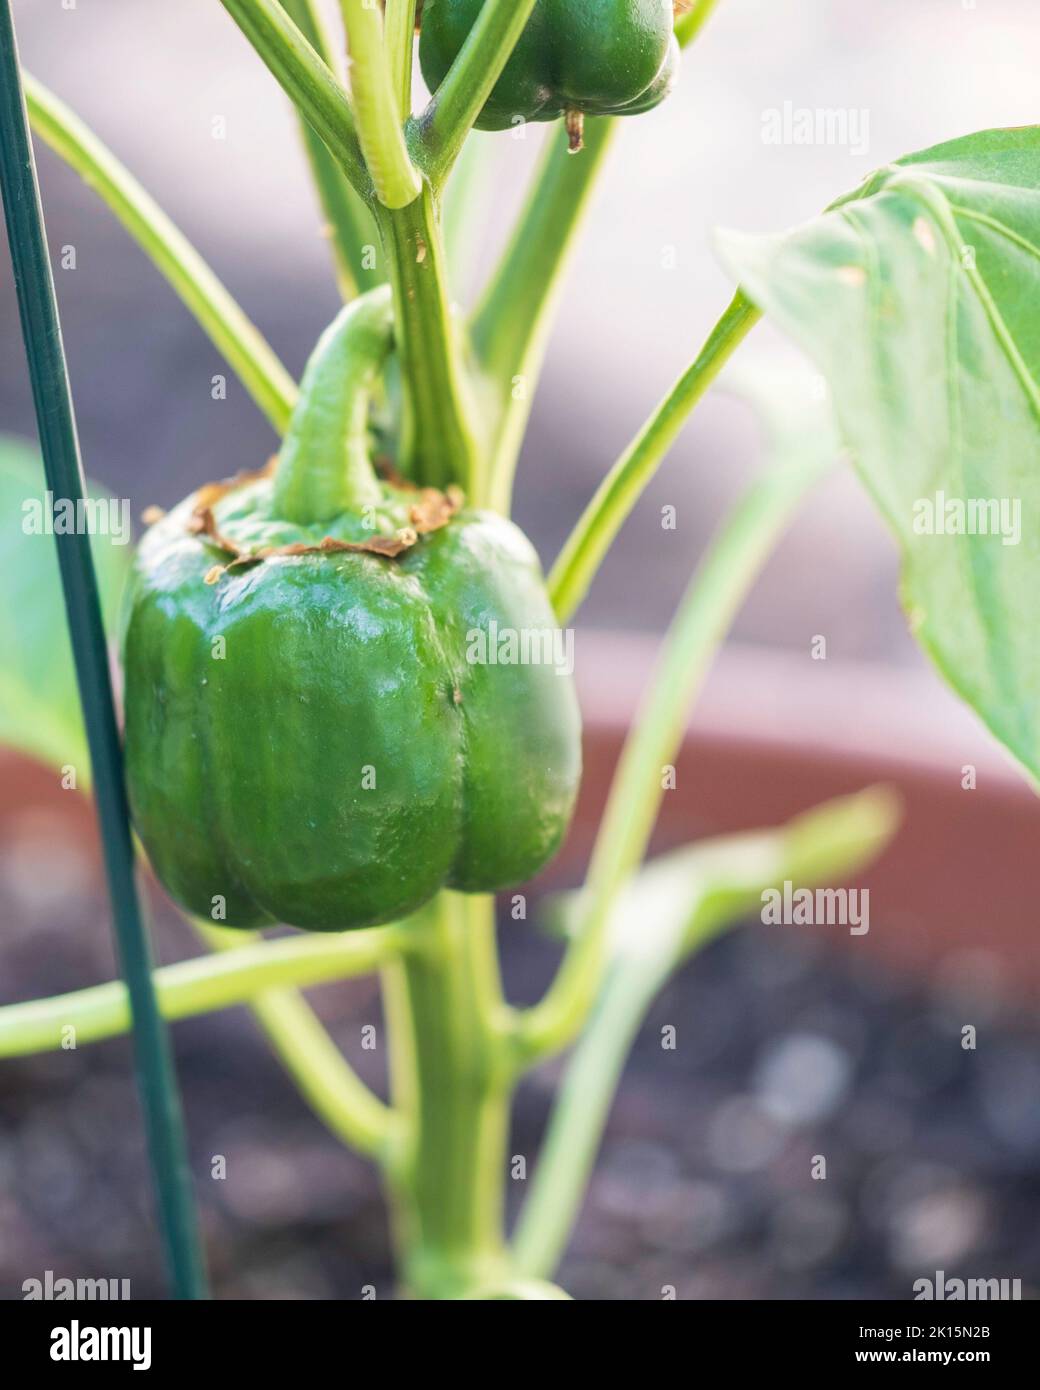 Potted red bell pepper plant, capsicum annuum, growing and still green. Example of container gardening. Summer, Wichita, Kansas, USA. Stock Photo